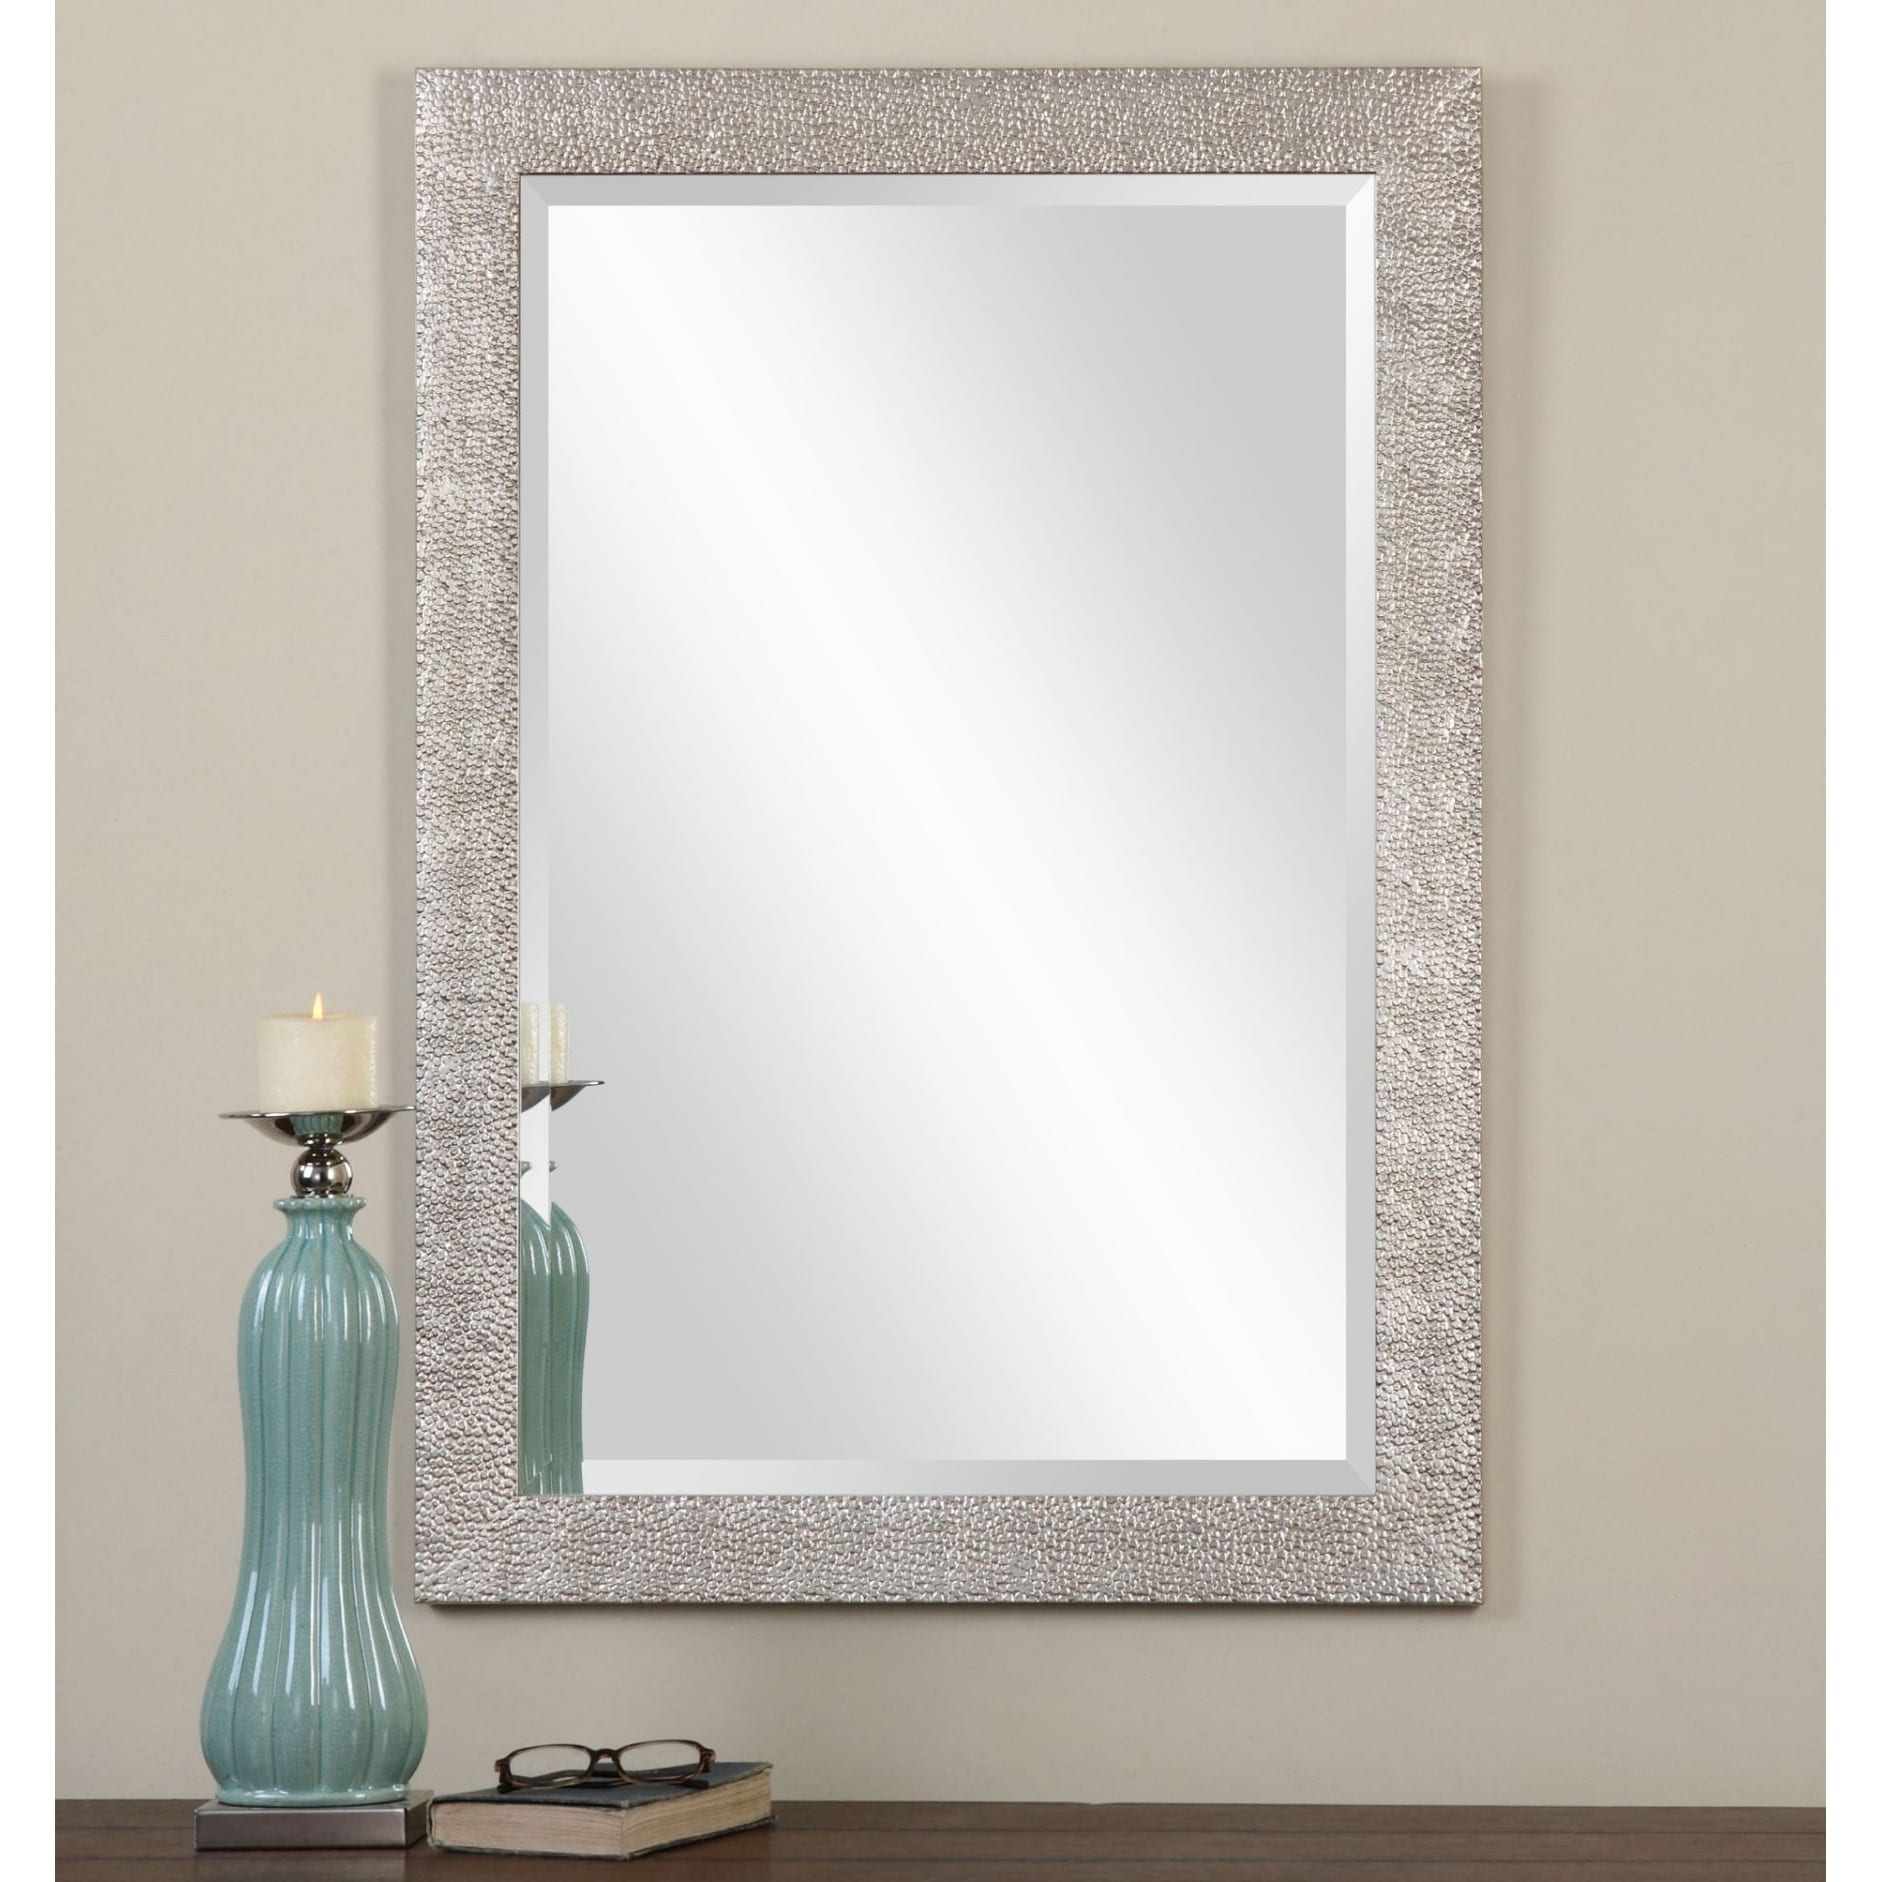 Uttermost Porcius Antiqued Silver Textured Frame Wall Mirror - Antiqued Silver